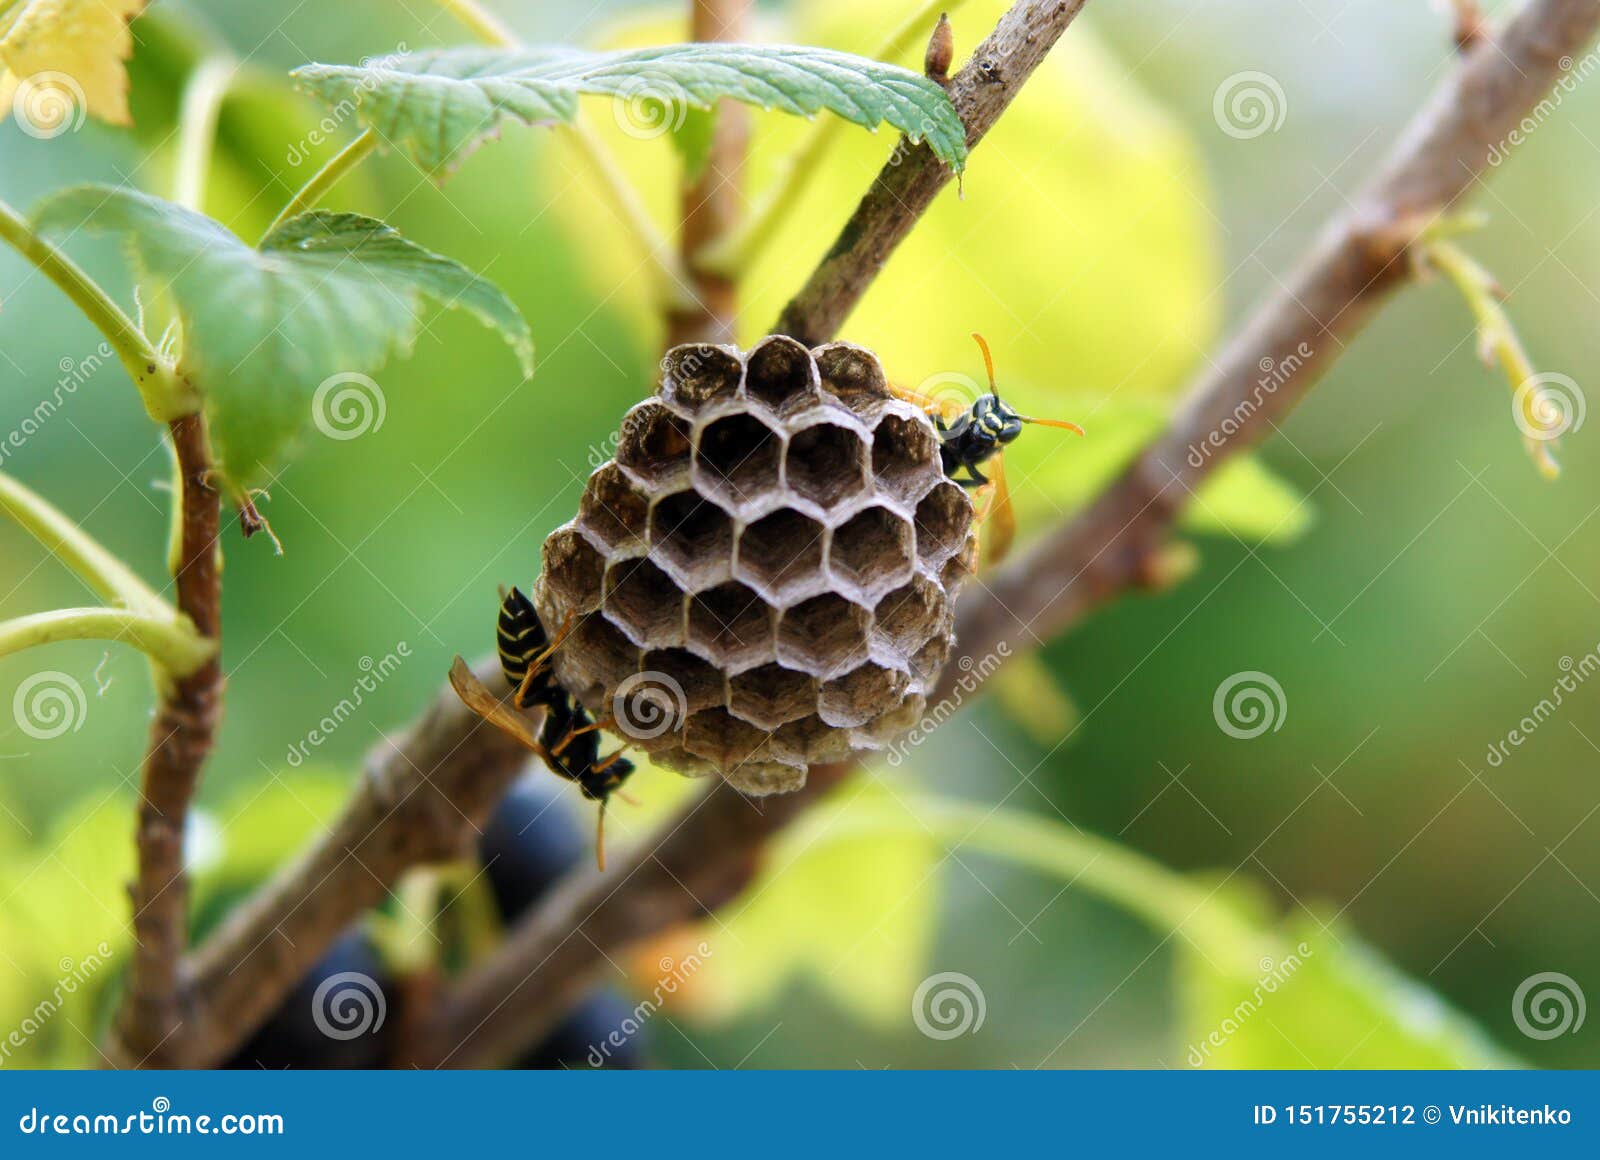 paper wasps construct nest